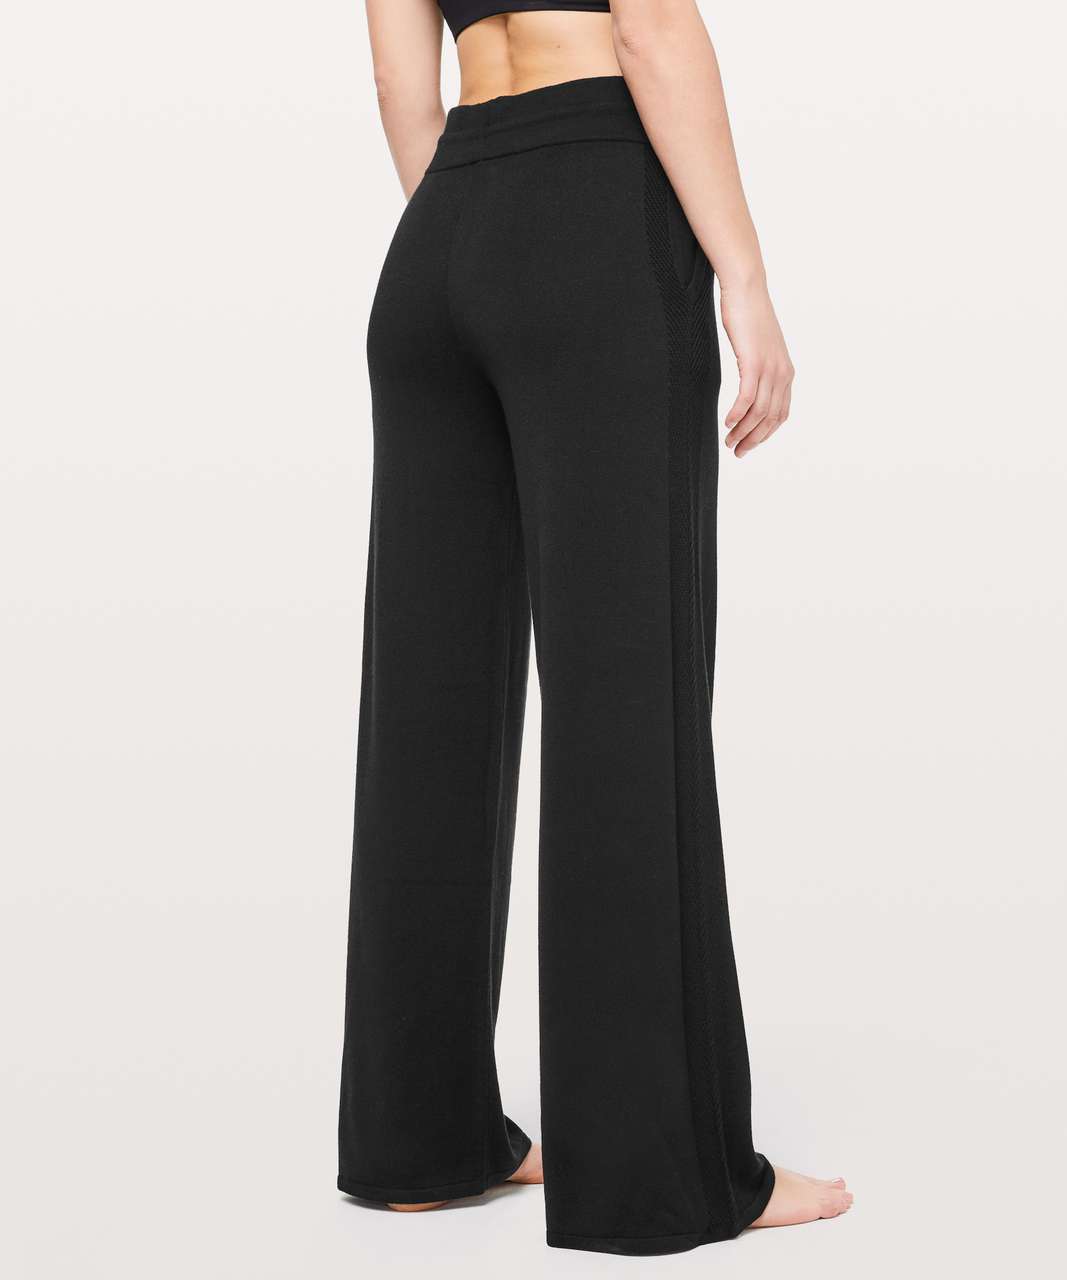 lululemon in the comfort zone pant